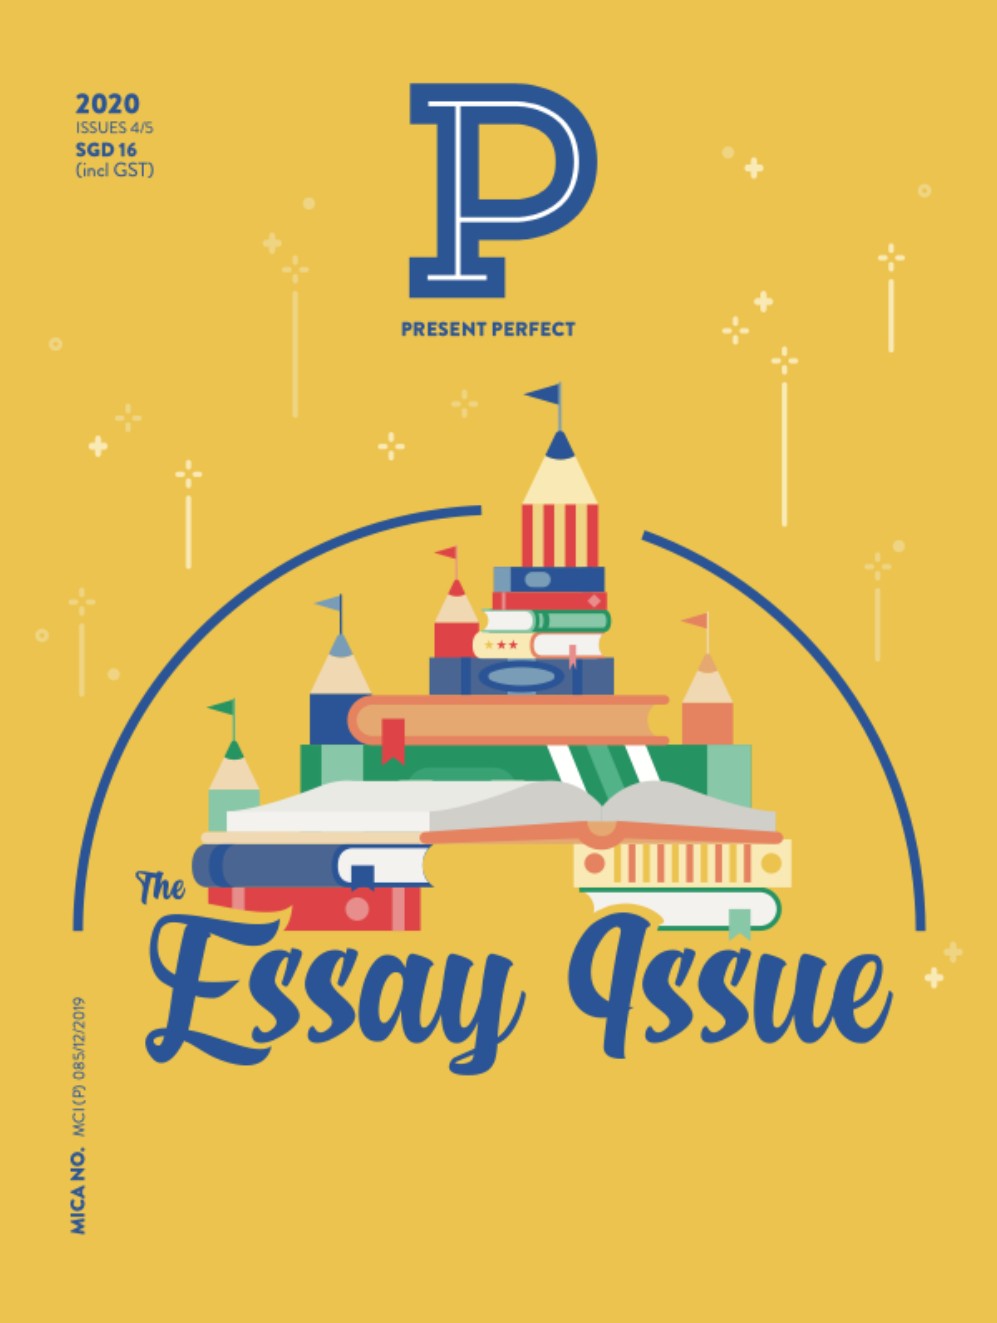 Present Perfect [SET D] - Assorted Issues - 2 Double (Essay)+ 1 Single -5 issues